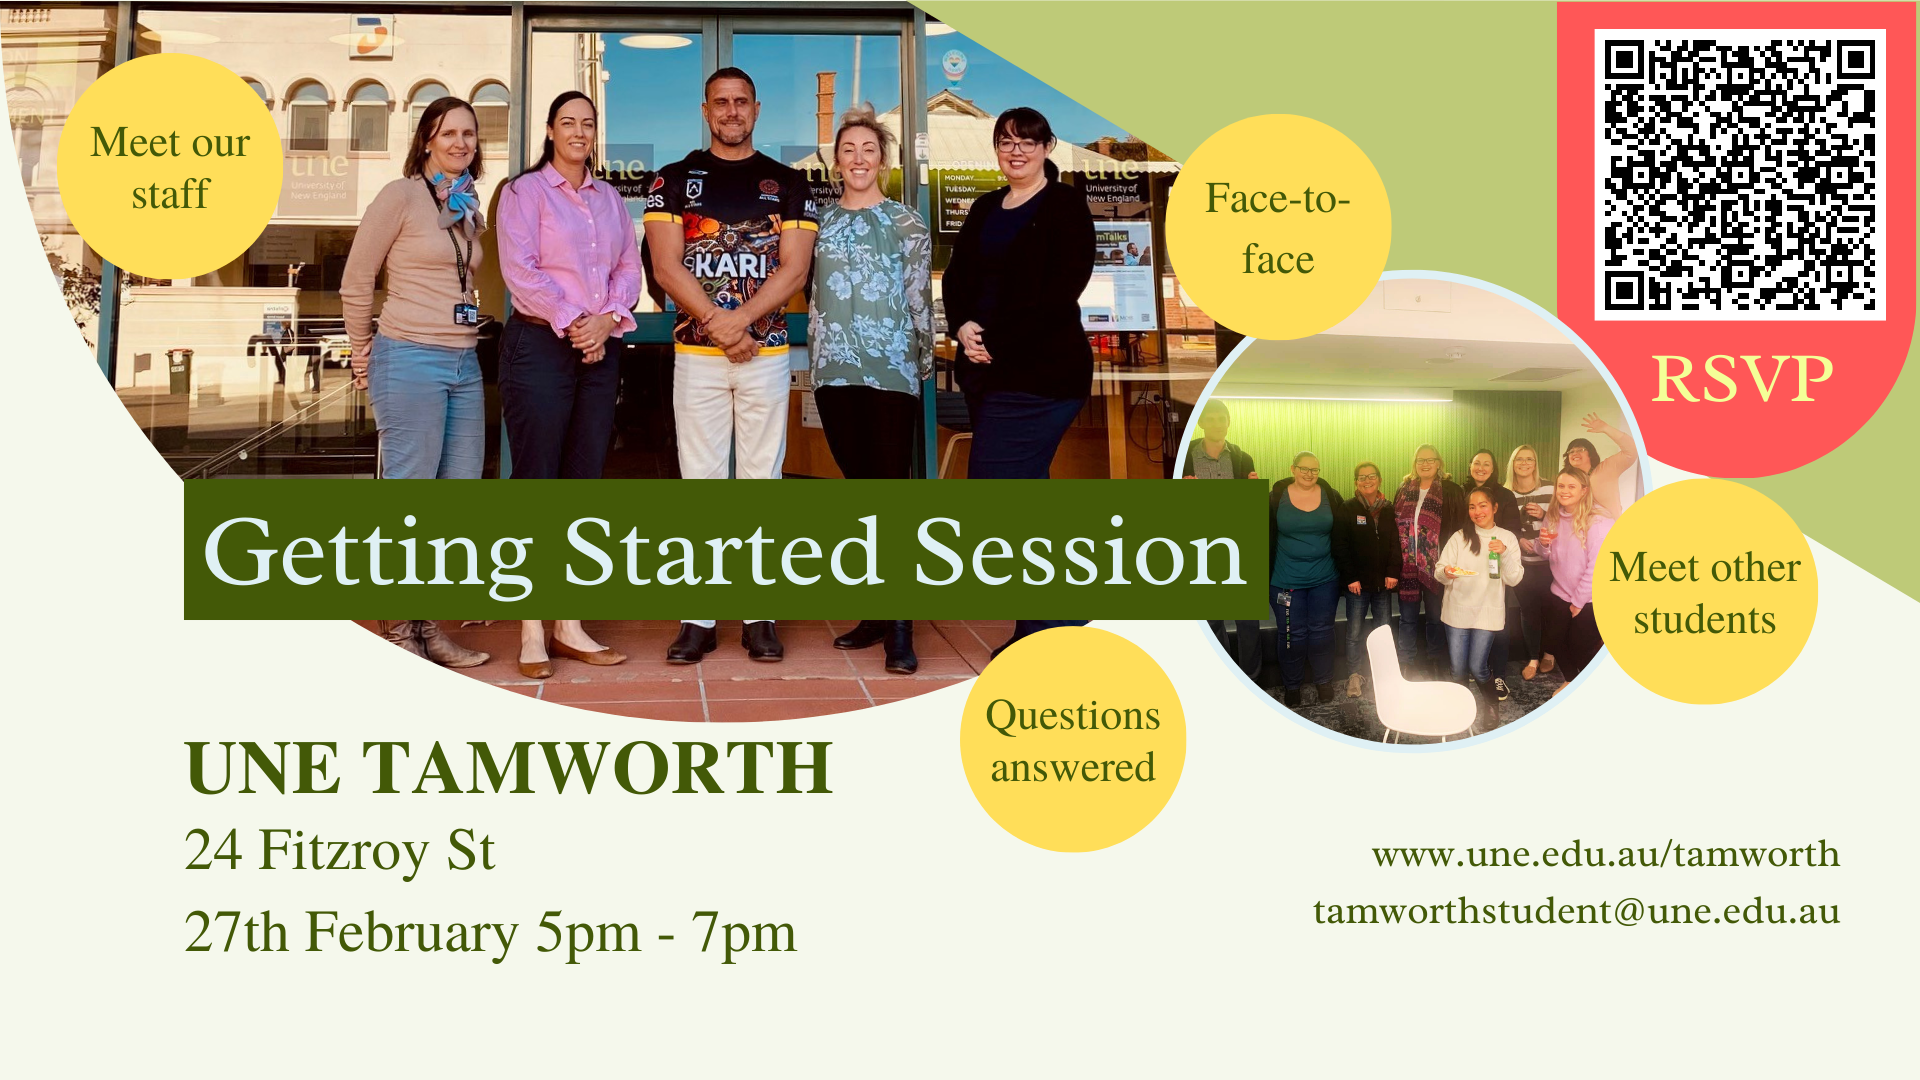 UNE Tamworth's Getting Started Session 27th of February from 5pm to 7pm at UNE Tamworth